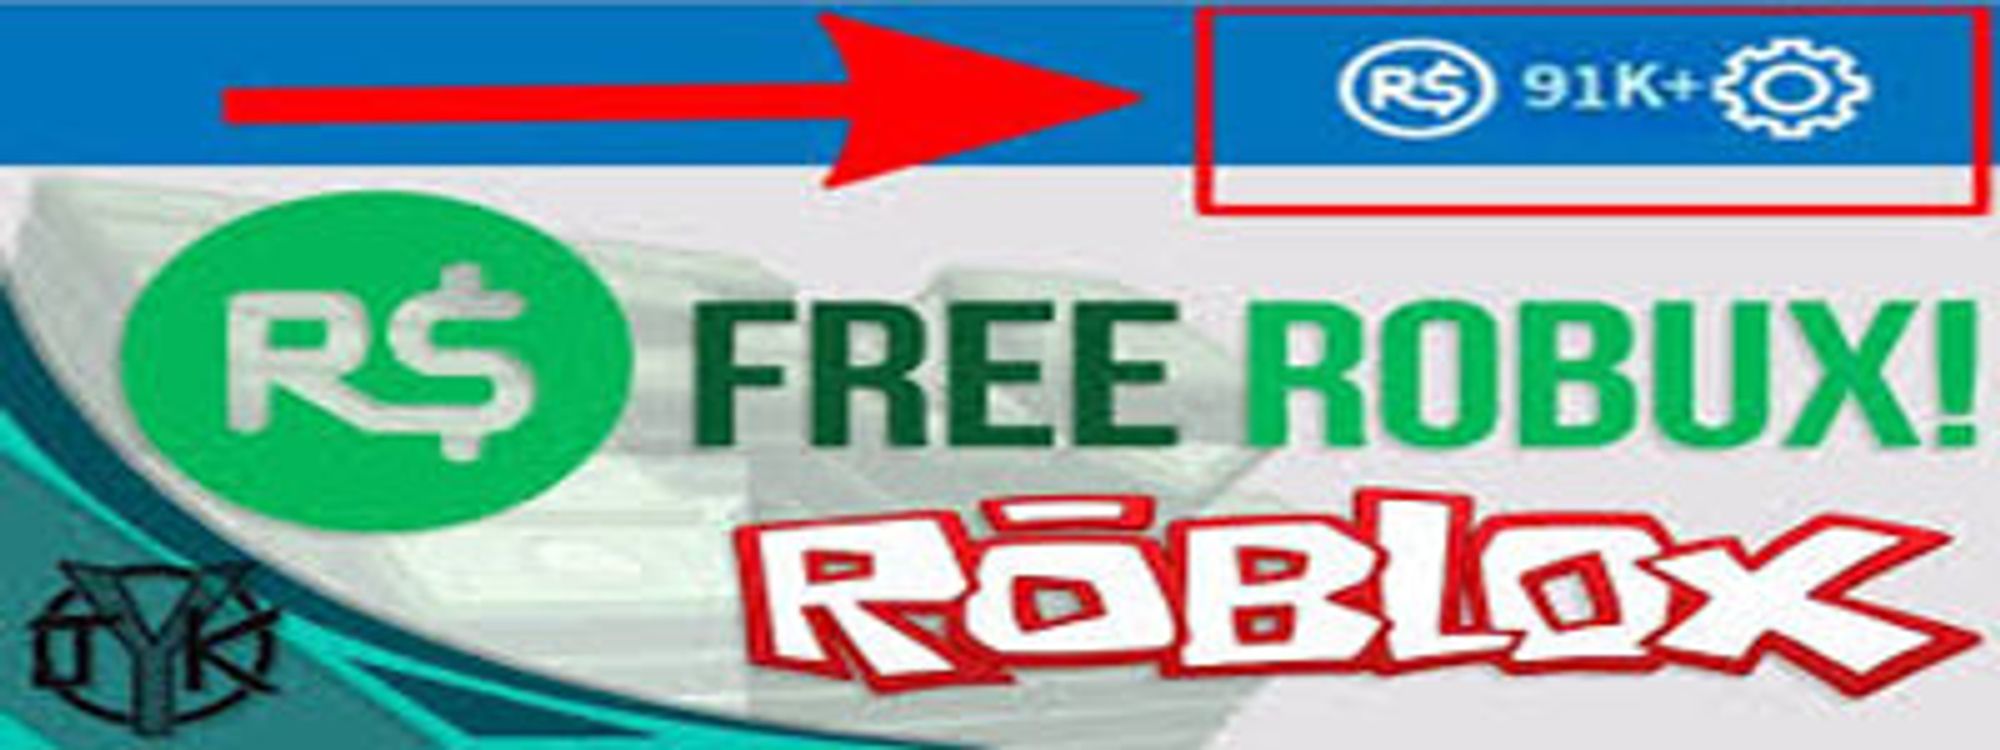 free robux 333 weebly roblox star code